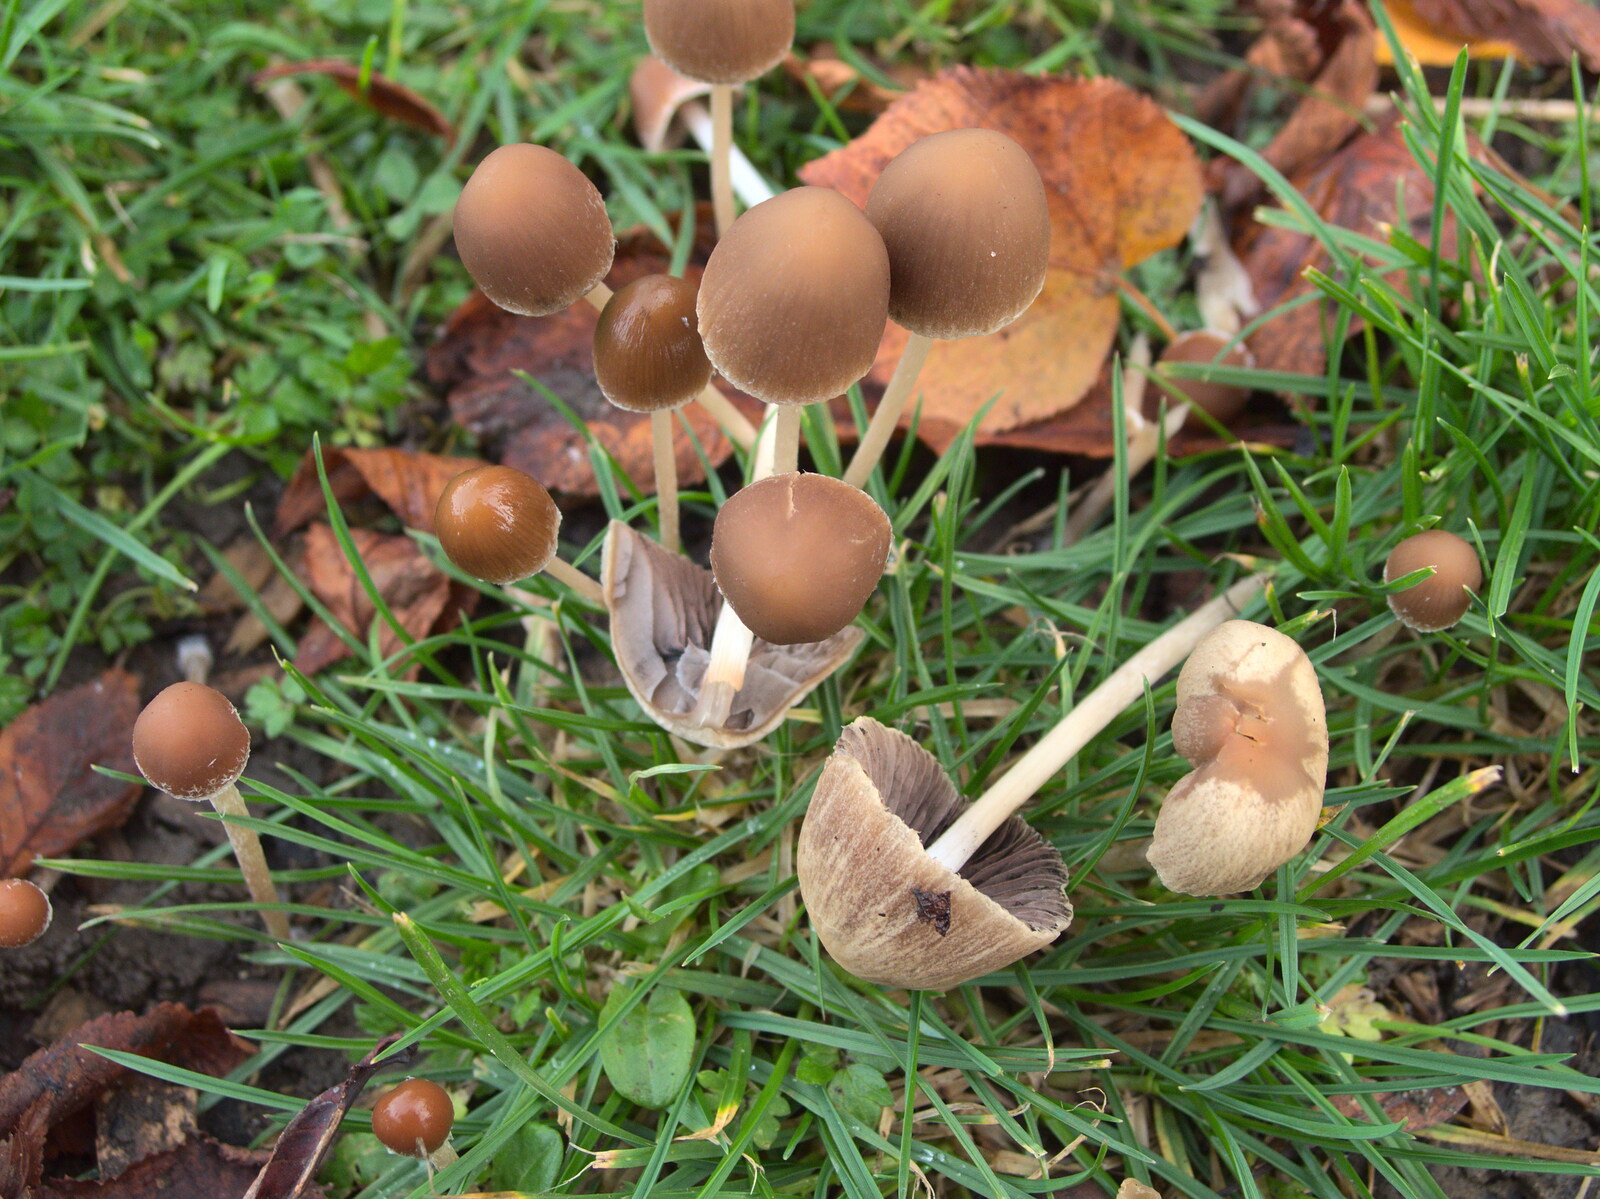 A pile of small mushrooms from Apple Picking and The BBs at Framingham Earl, Norfolk - 25th October 2015